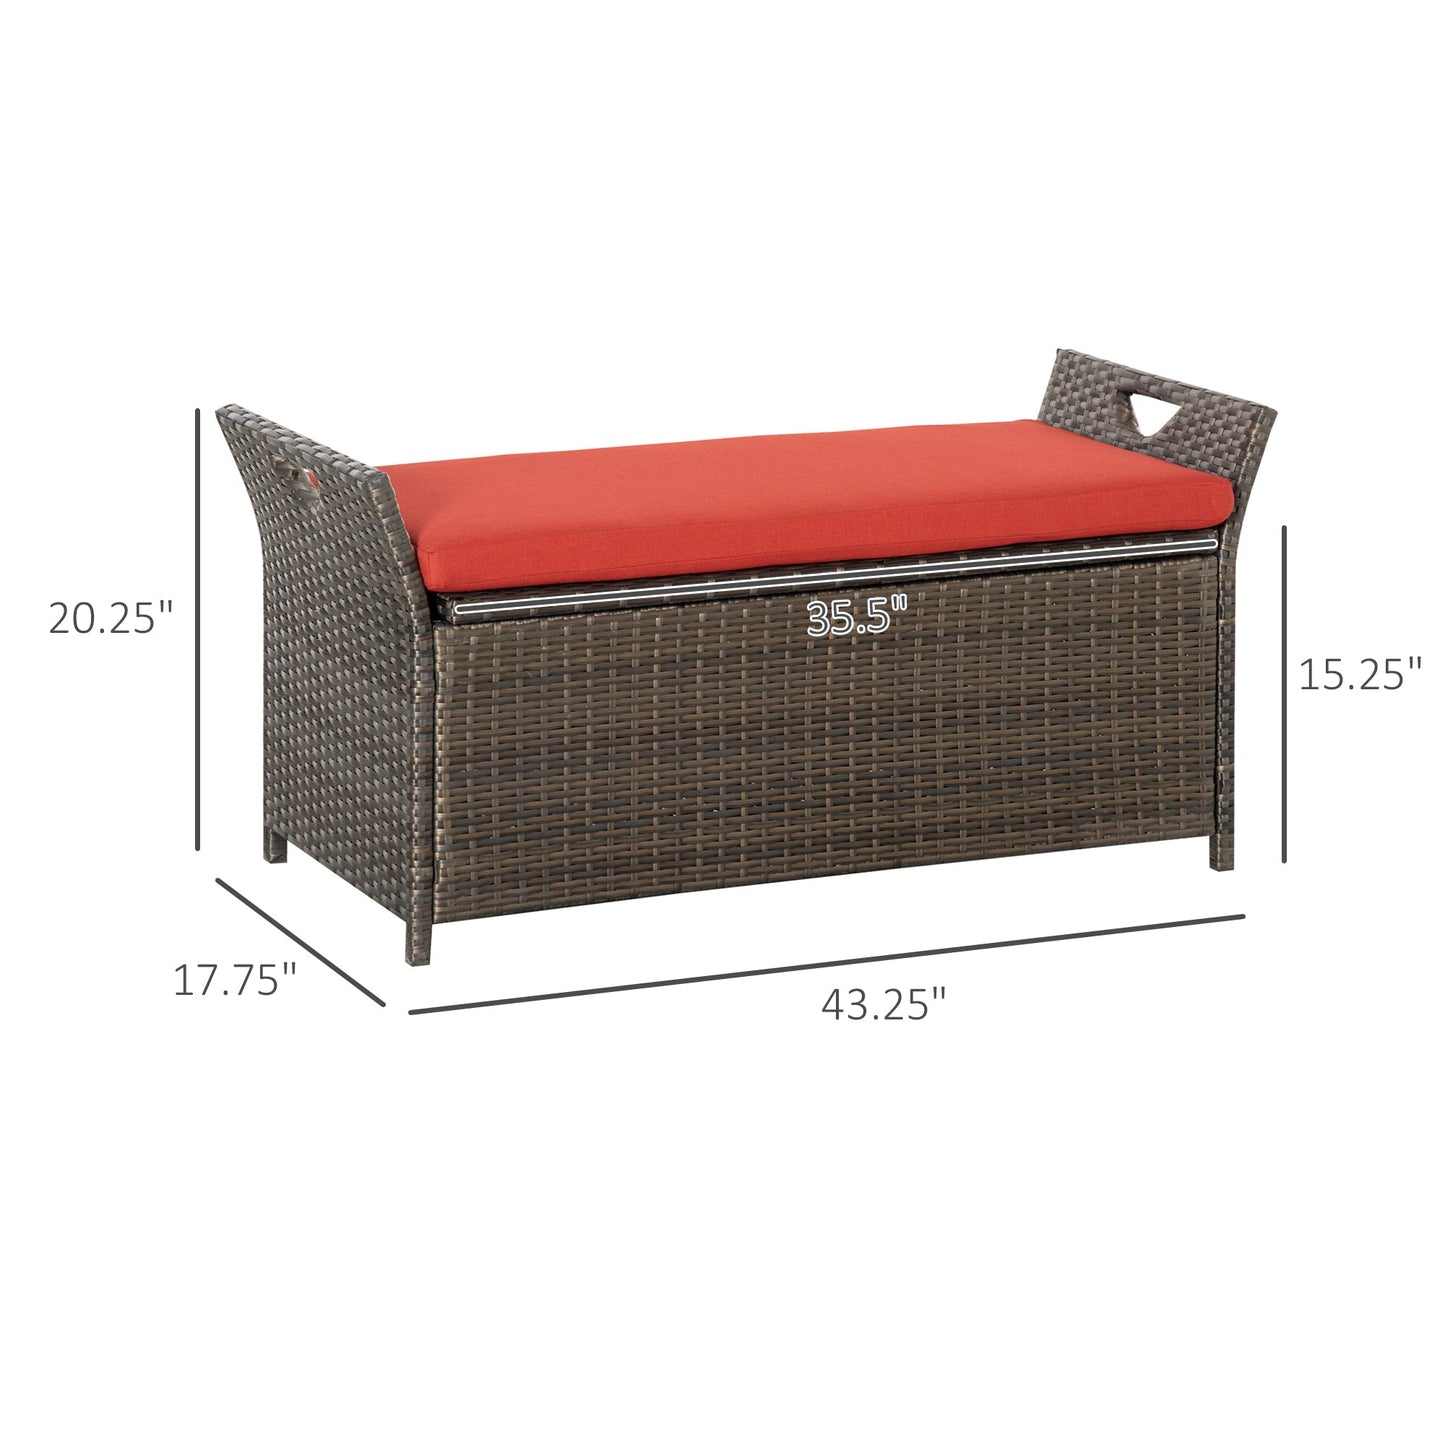 Outdoor and Garden-27 Gallon Patio Wicker Storage Bench, Outdoor PE Rattan Furniture, 2-In-1 Large Capacity Footstool Rectangle Basket Box, Red - Outdoor Style Company